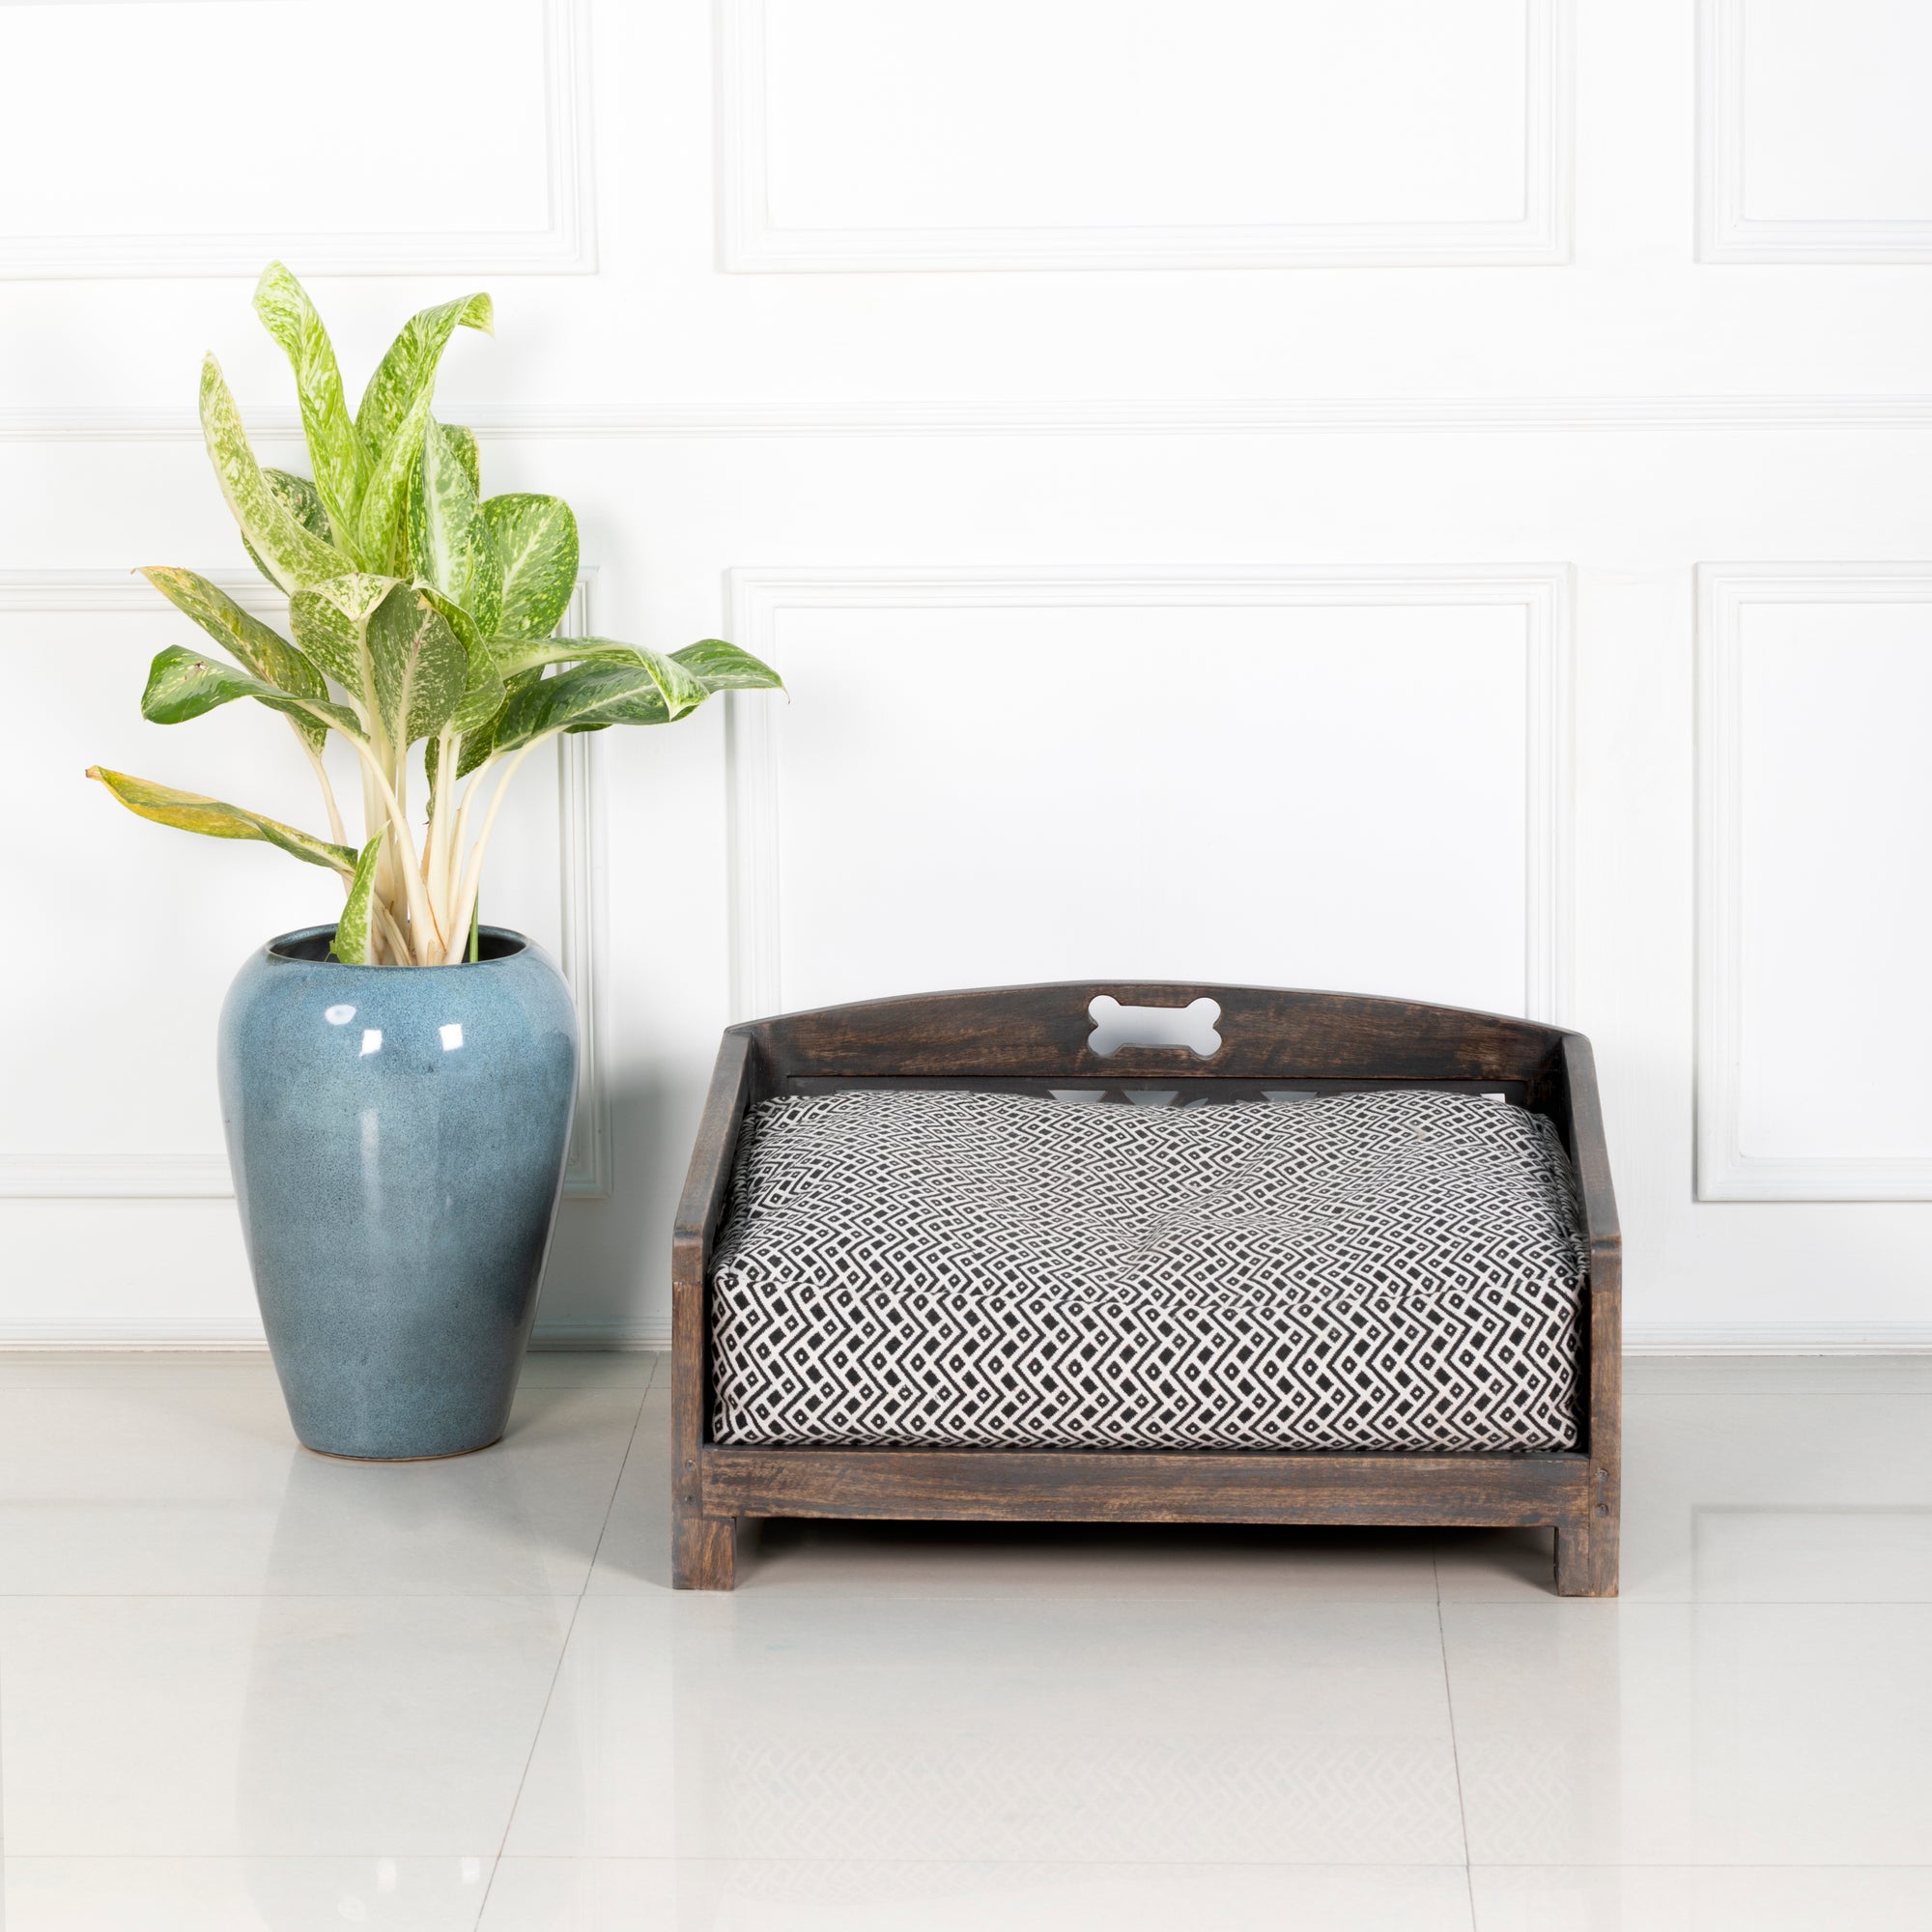 Bone and Stripes Pattern Pet Bed